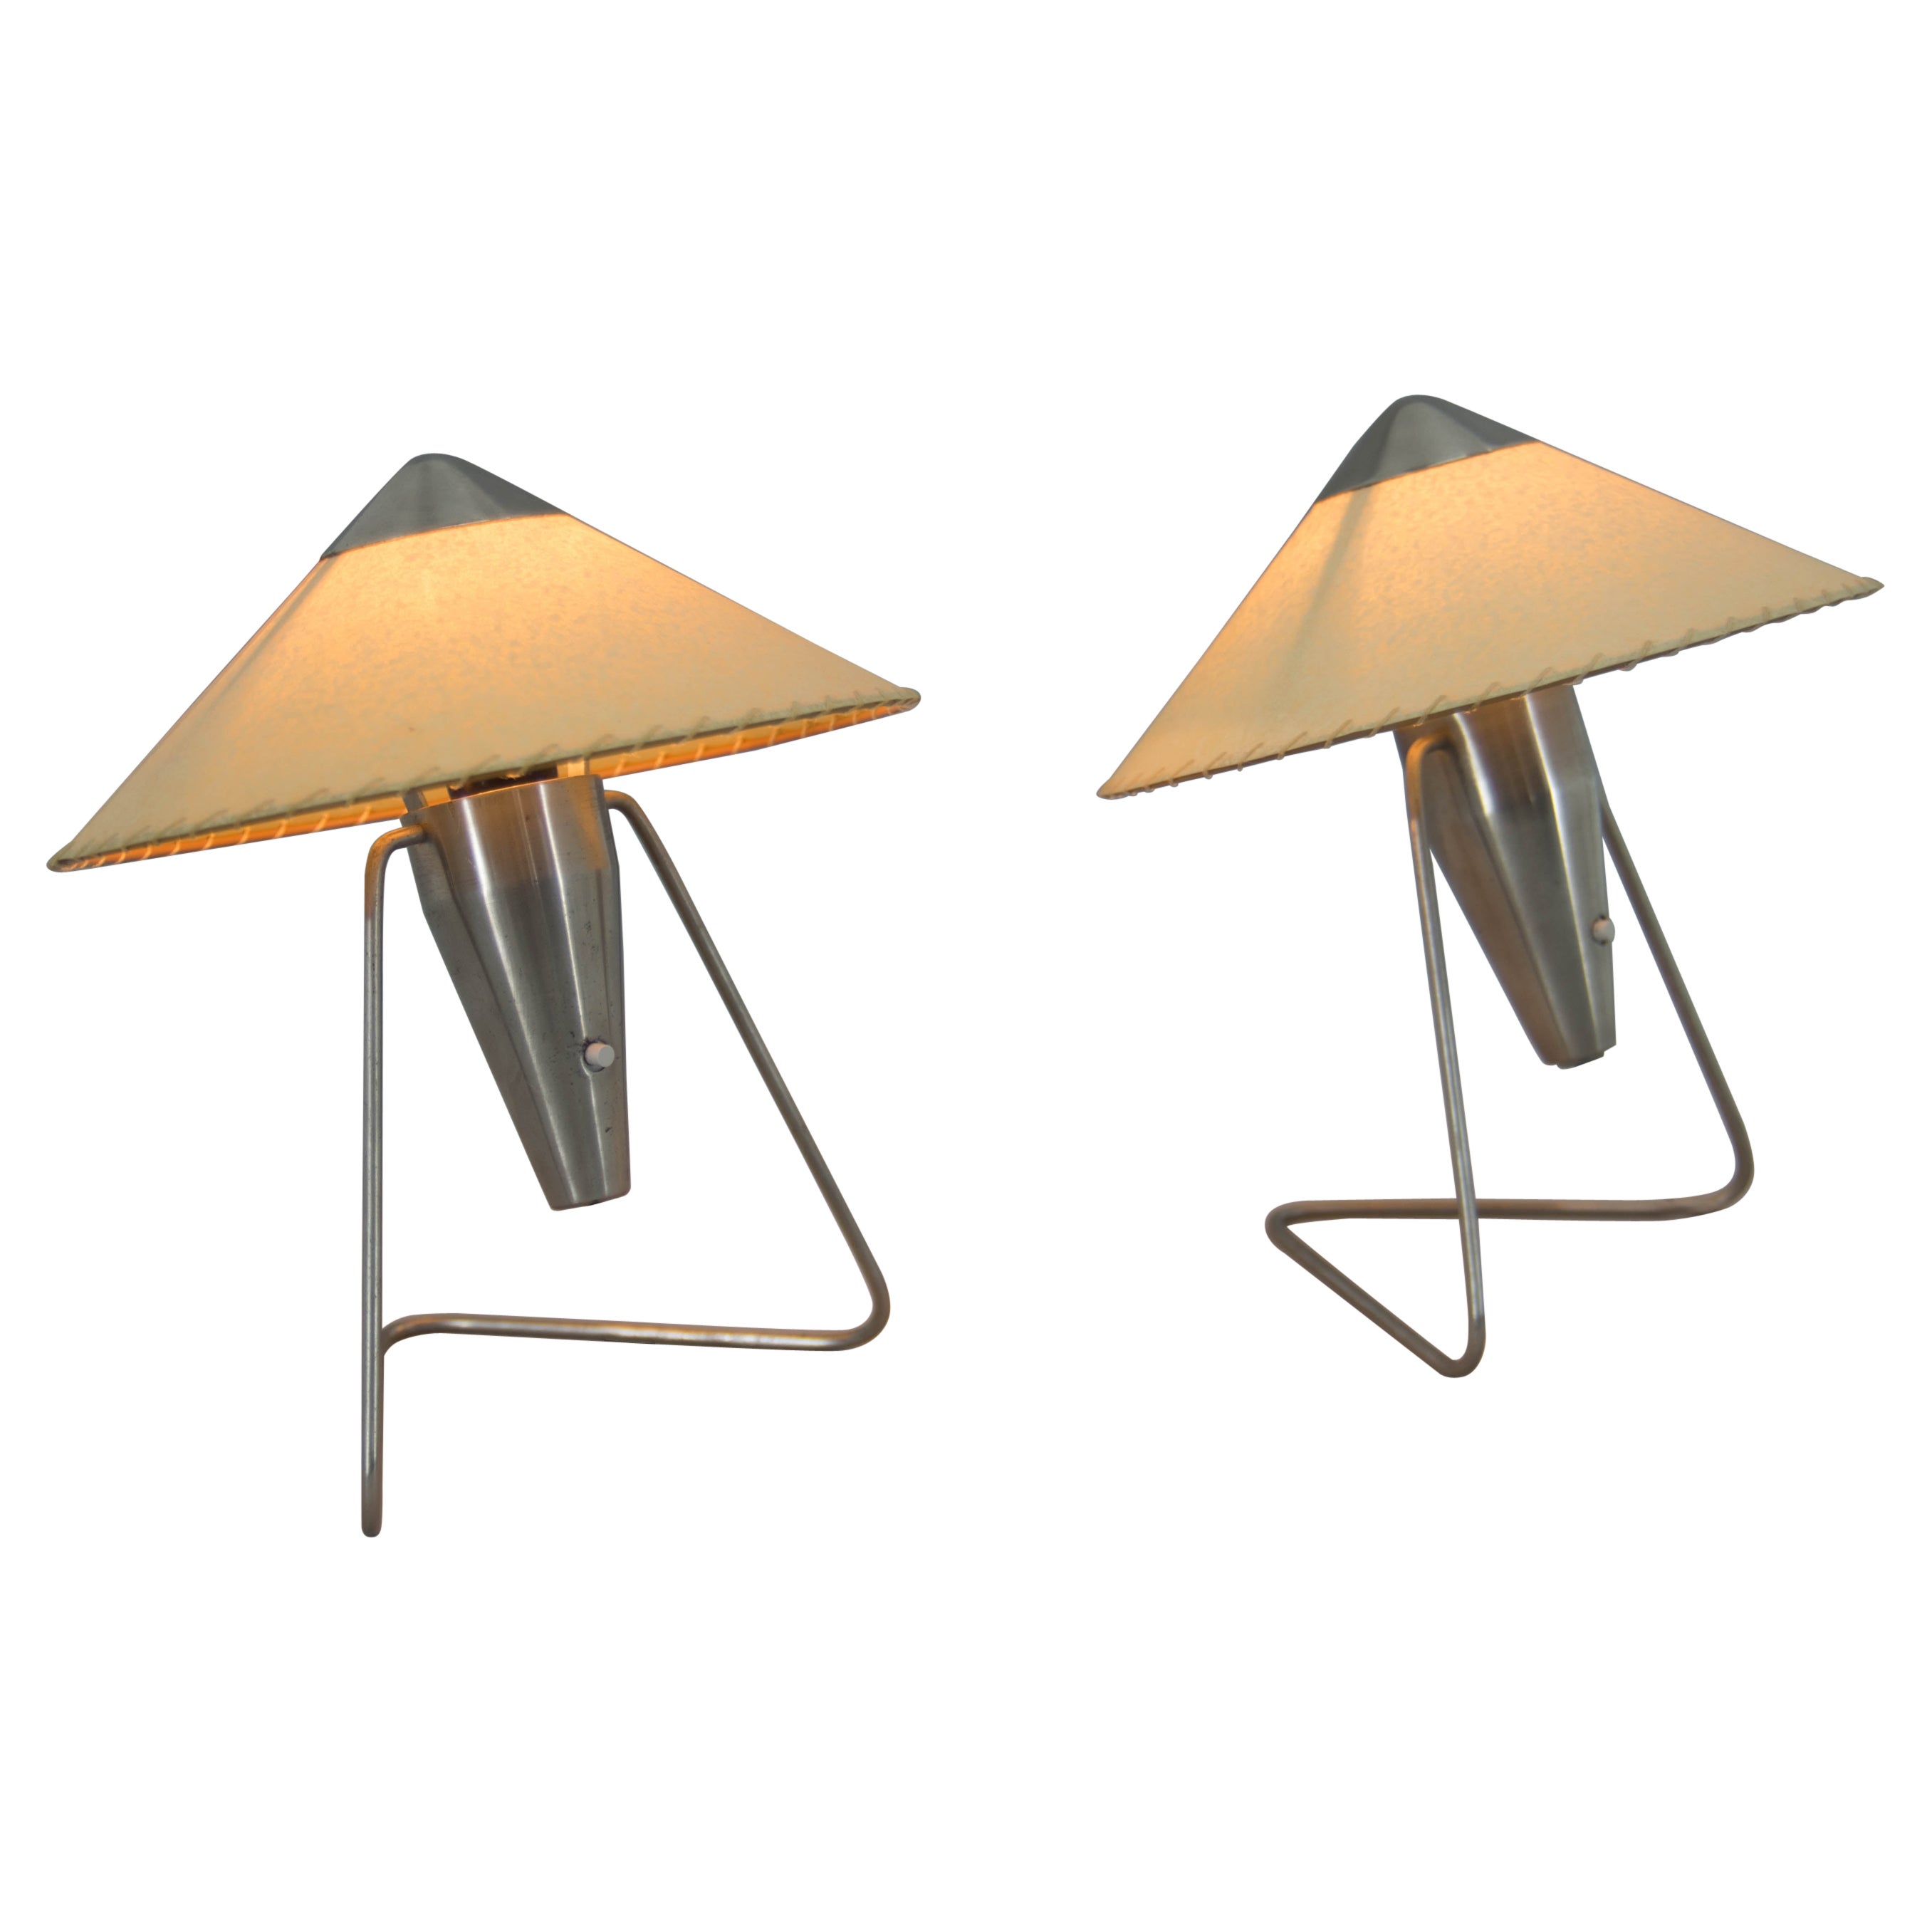 Set of Two Table or Wall Lamps by Frantova for OKOLO, Czechoslovakia, 1950s